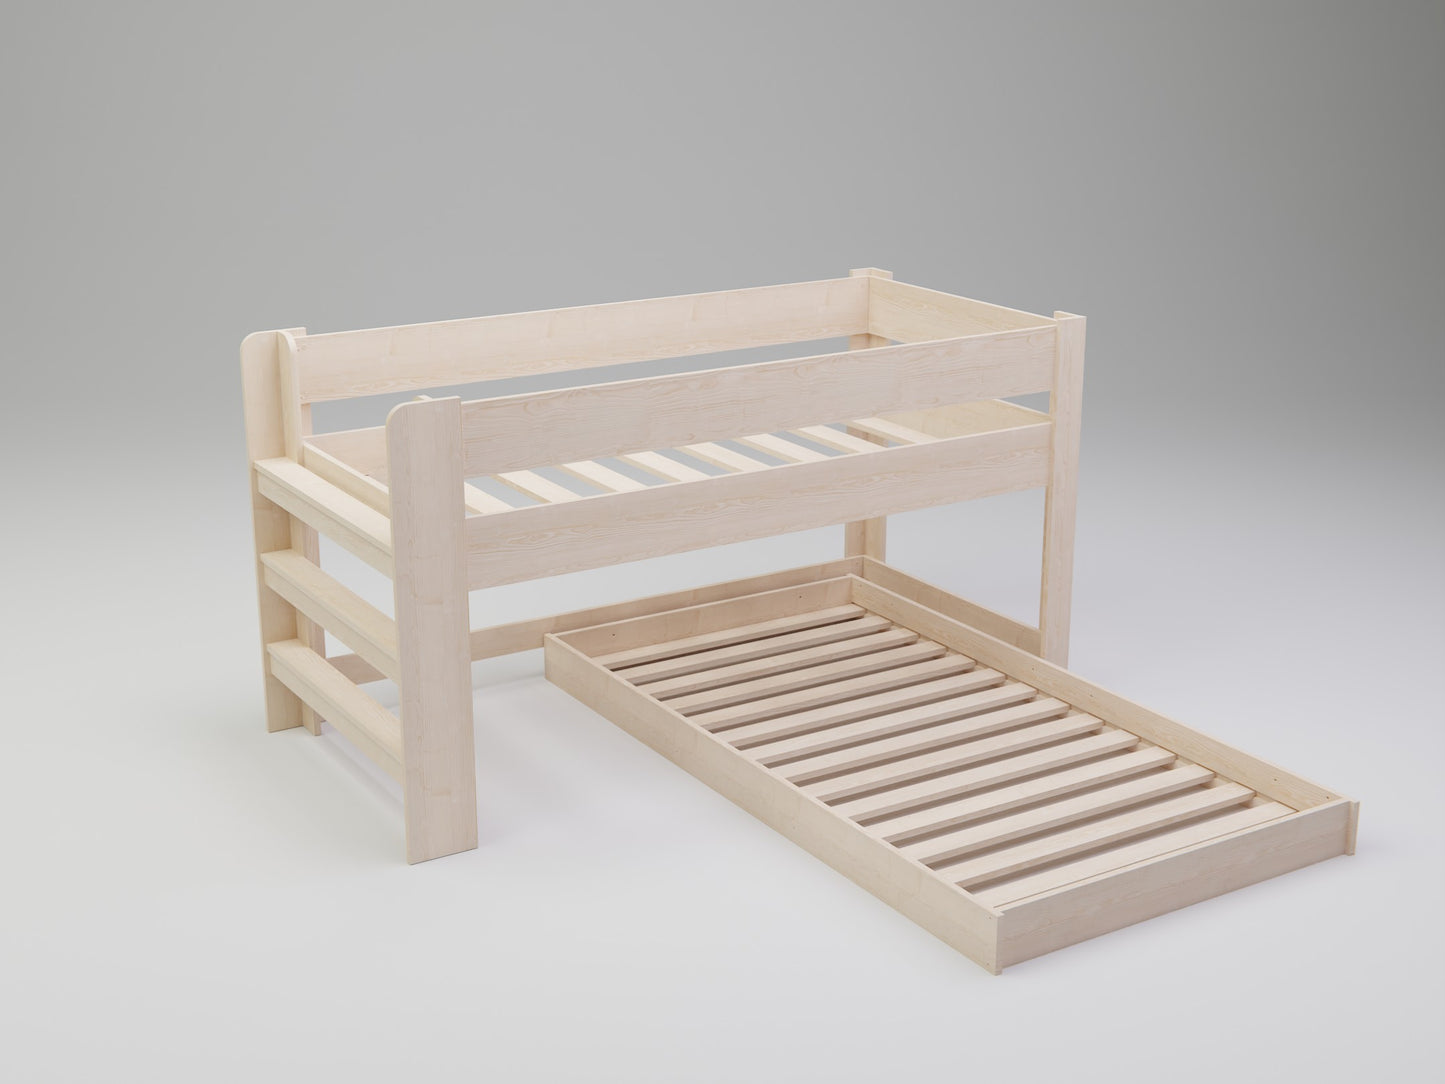 Top-grade NZ Pine in every L shaped bunk bed: Strength, longevity, and aesthetic charm in our wooden kids beds.